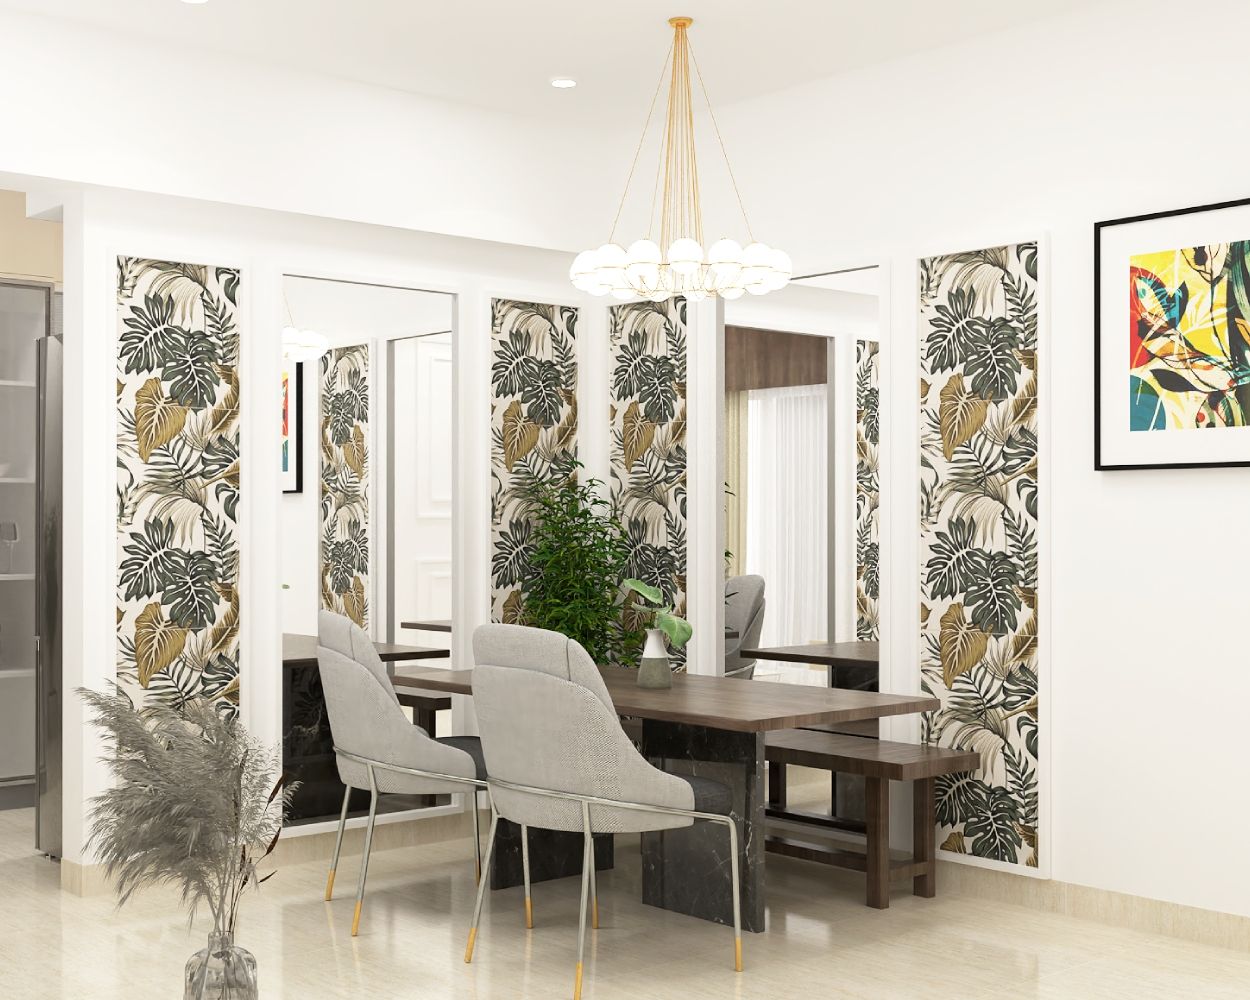 Contemporary 2-Seater Grey And Wood Dining Room Design With Wall Mirrors And Leafy Wallpaper